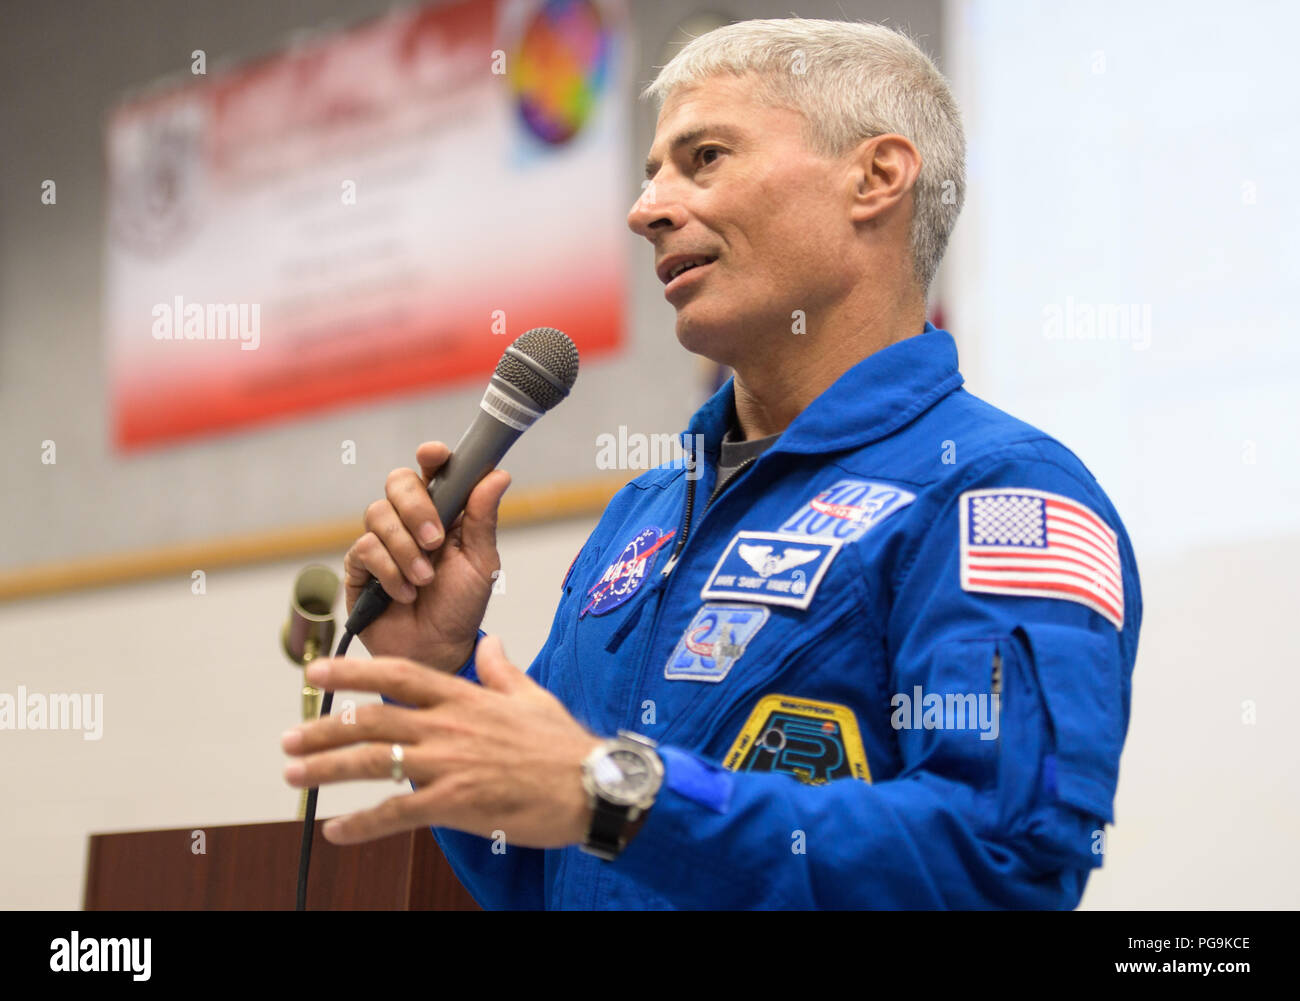 NASA astronaut Mark Vande Hei speaks about his time onboard the International Space Station during a presentation to students at Walt Whitman Middle School, Thursday, June 14, 2018 in Alexandria, Va. Vande Hei and astronaut Joe Acaba answered questions from the audience and spoke about their experiences aboard the International Space Station for 168 days as part of Expedition 53 and 54. Stock Photo